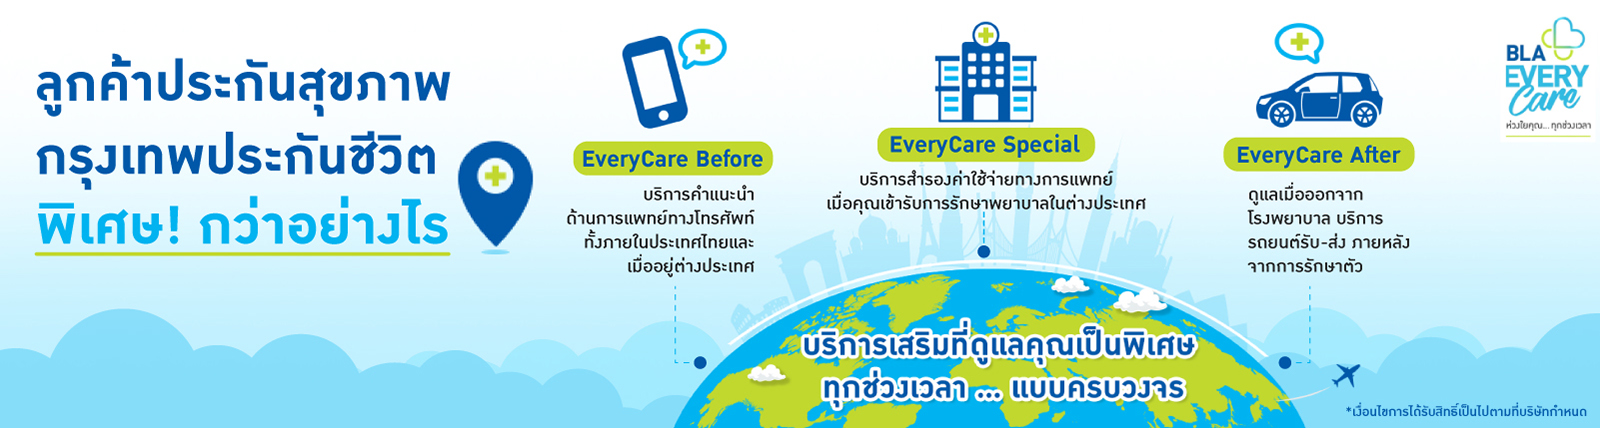 BLA Every Care Banner